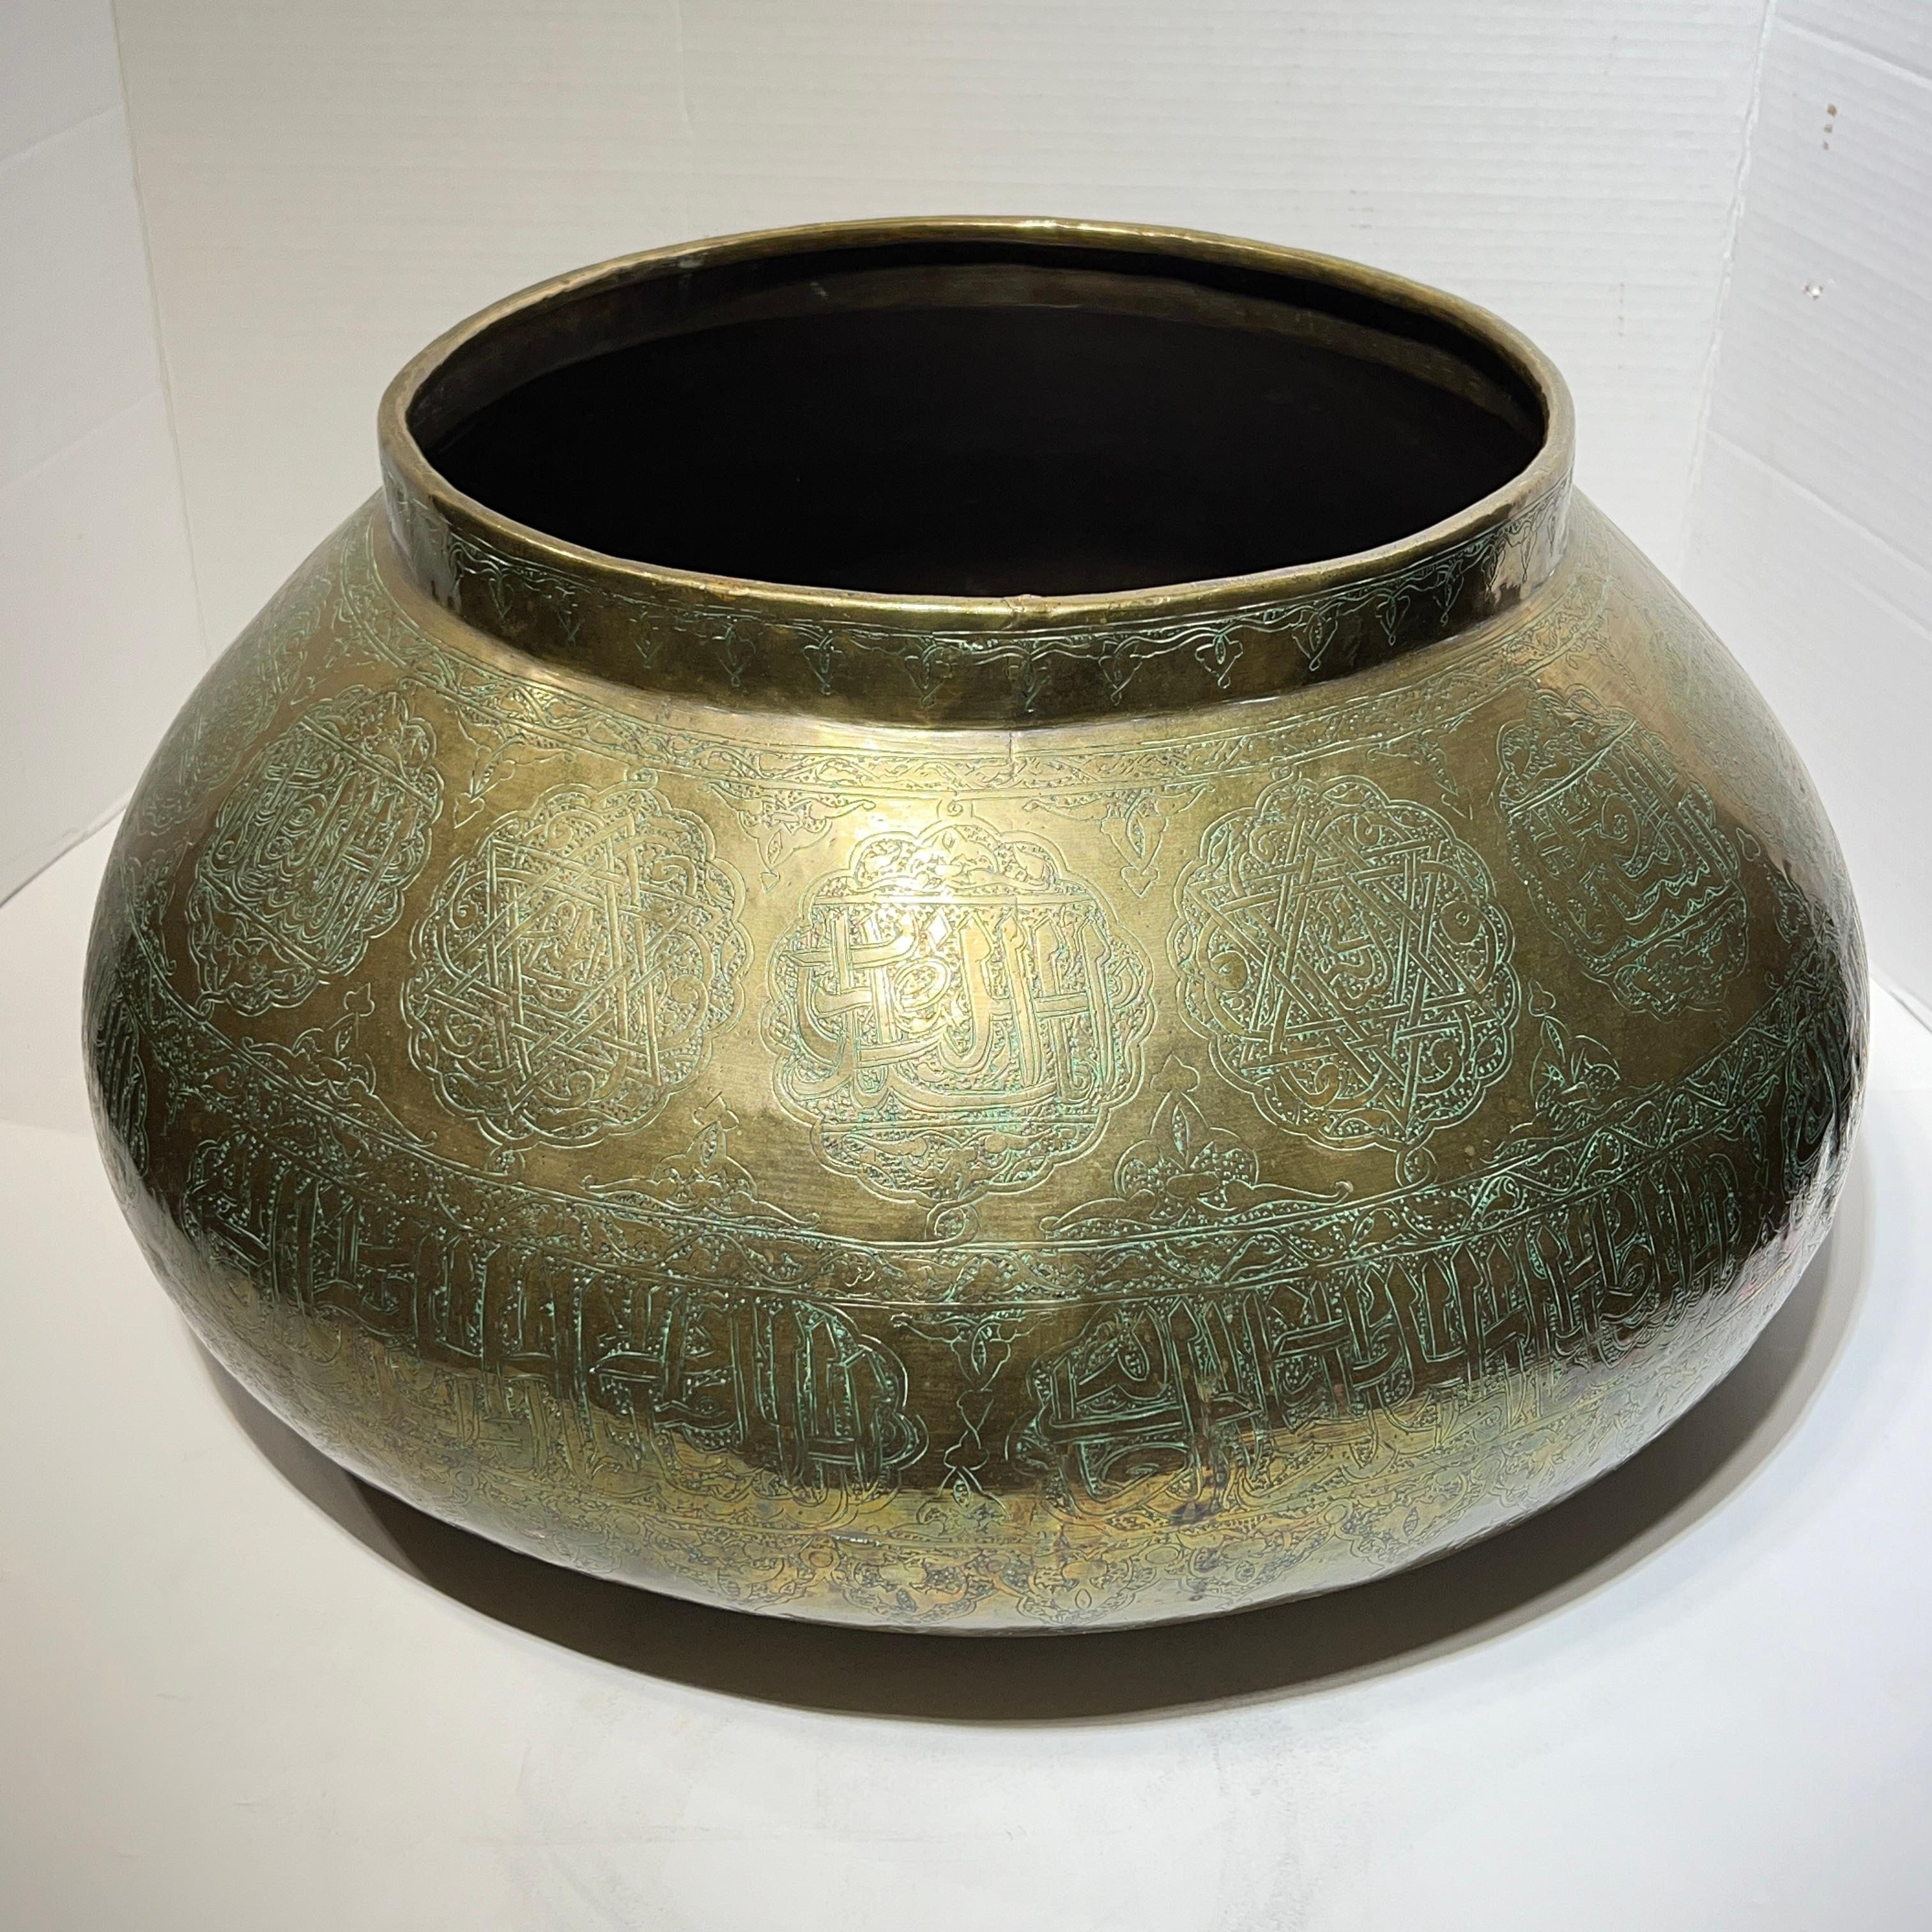 Large 19th Century Islamic Middle Eastern Engraved Brass Centerpiece Bowl In Good Condition For Sale In New York, NY